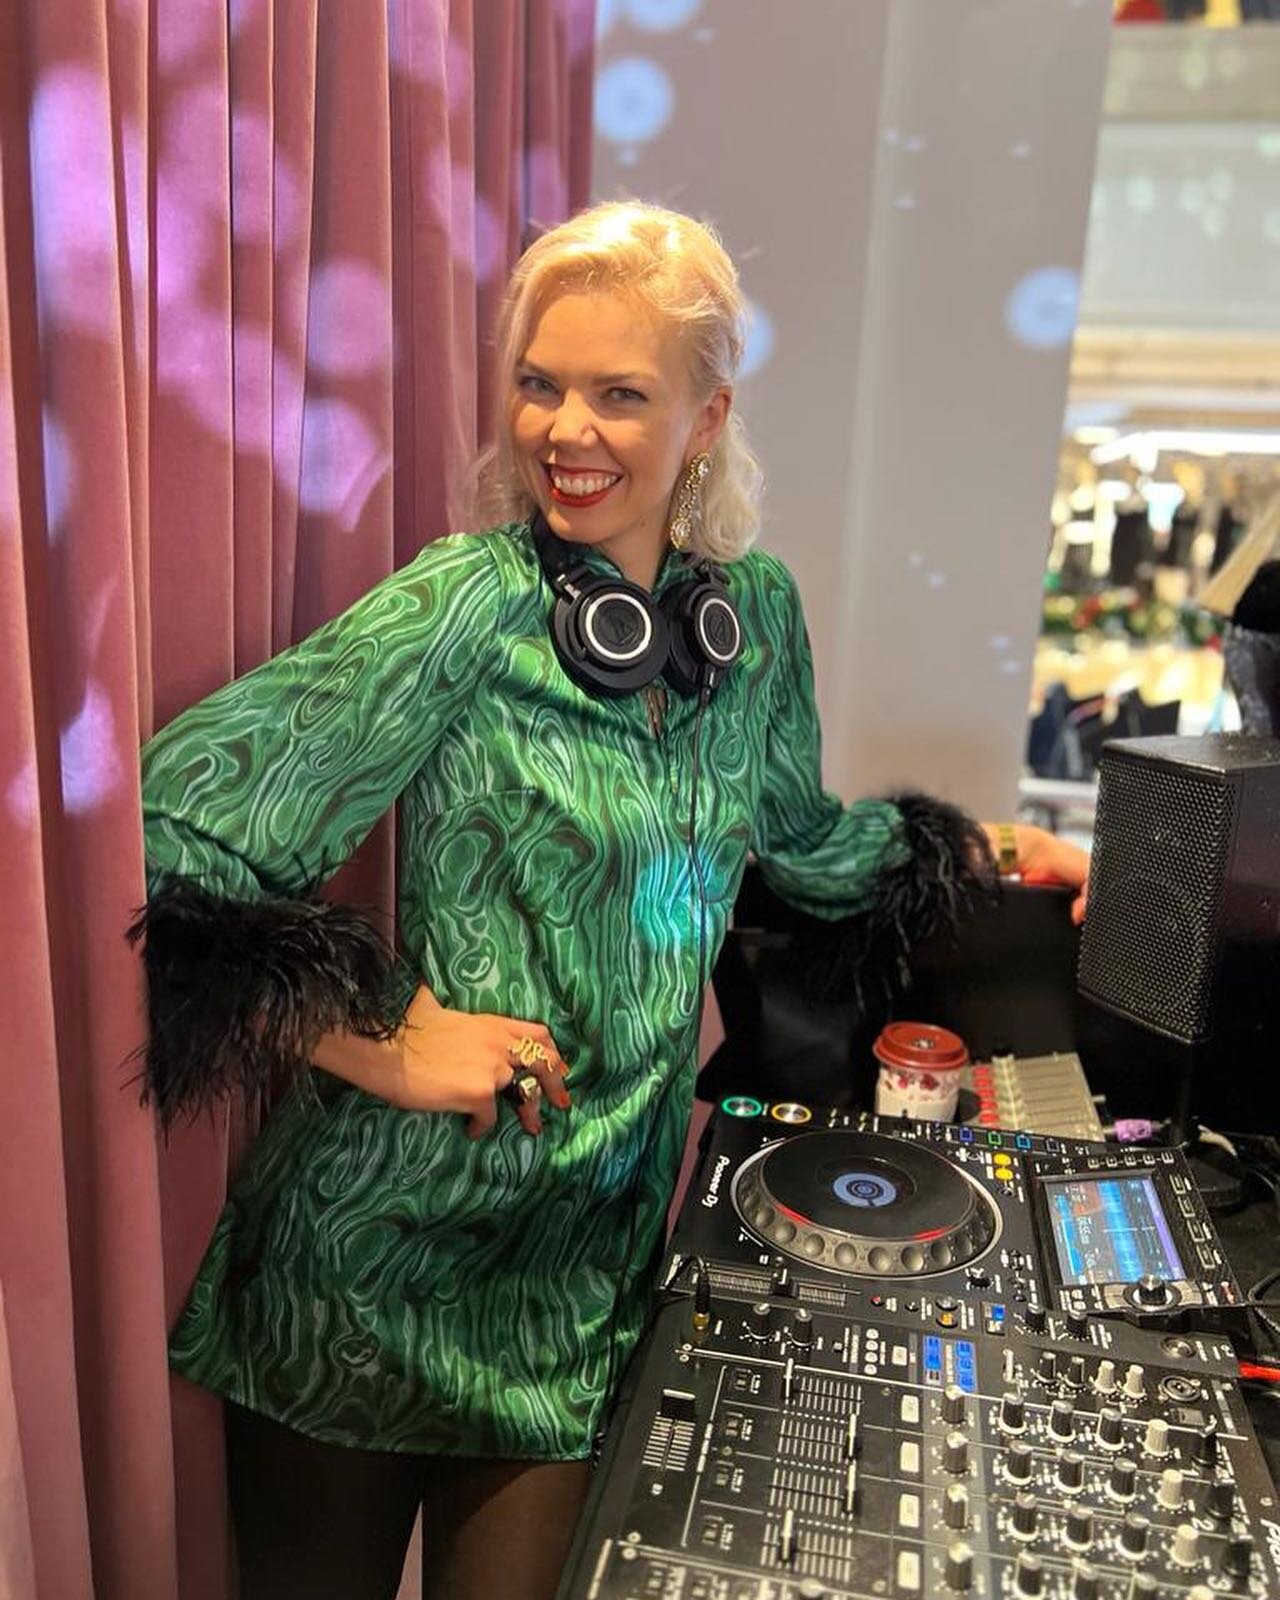 Back on the decks for Christmas @theofficialselfridges ! 🎅🎉🎶
Swipe for 🪩DISCO PUDS!!🪩👉🏼
.
Catch me back there this Wednesday &amp; Saturday! 🎶🎉🎧🎄
.
.
.
.
.
#christmas #season #dj #djlife #festivefun #funtimes #selfridges